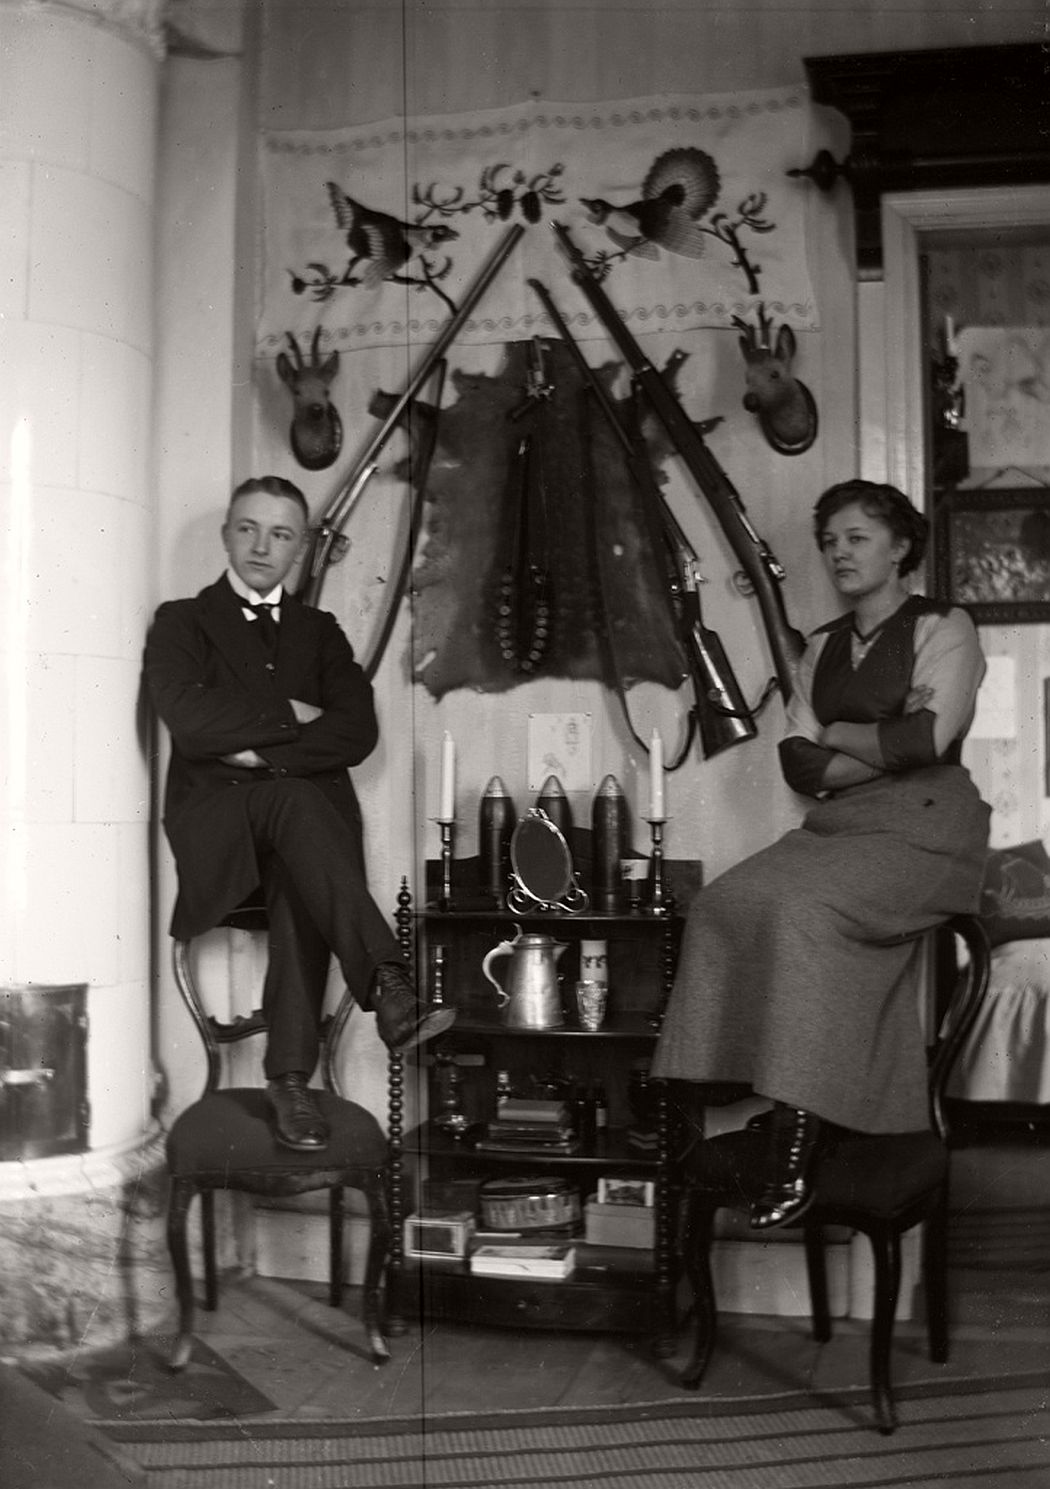 The siblings Carola and Henning Aurell photographed at his home in Frinnaryds, 1913.